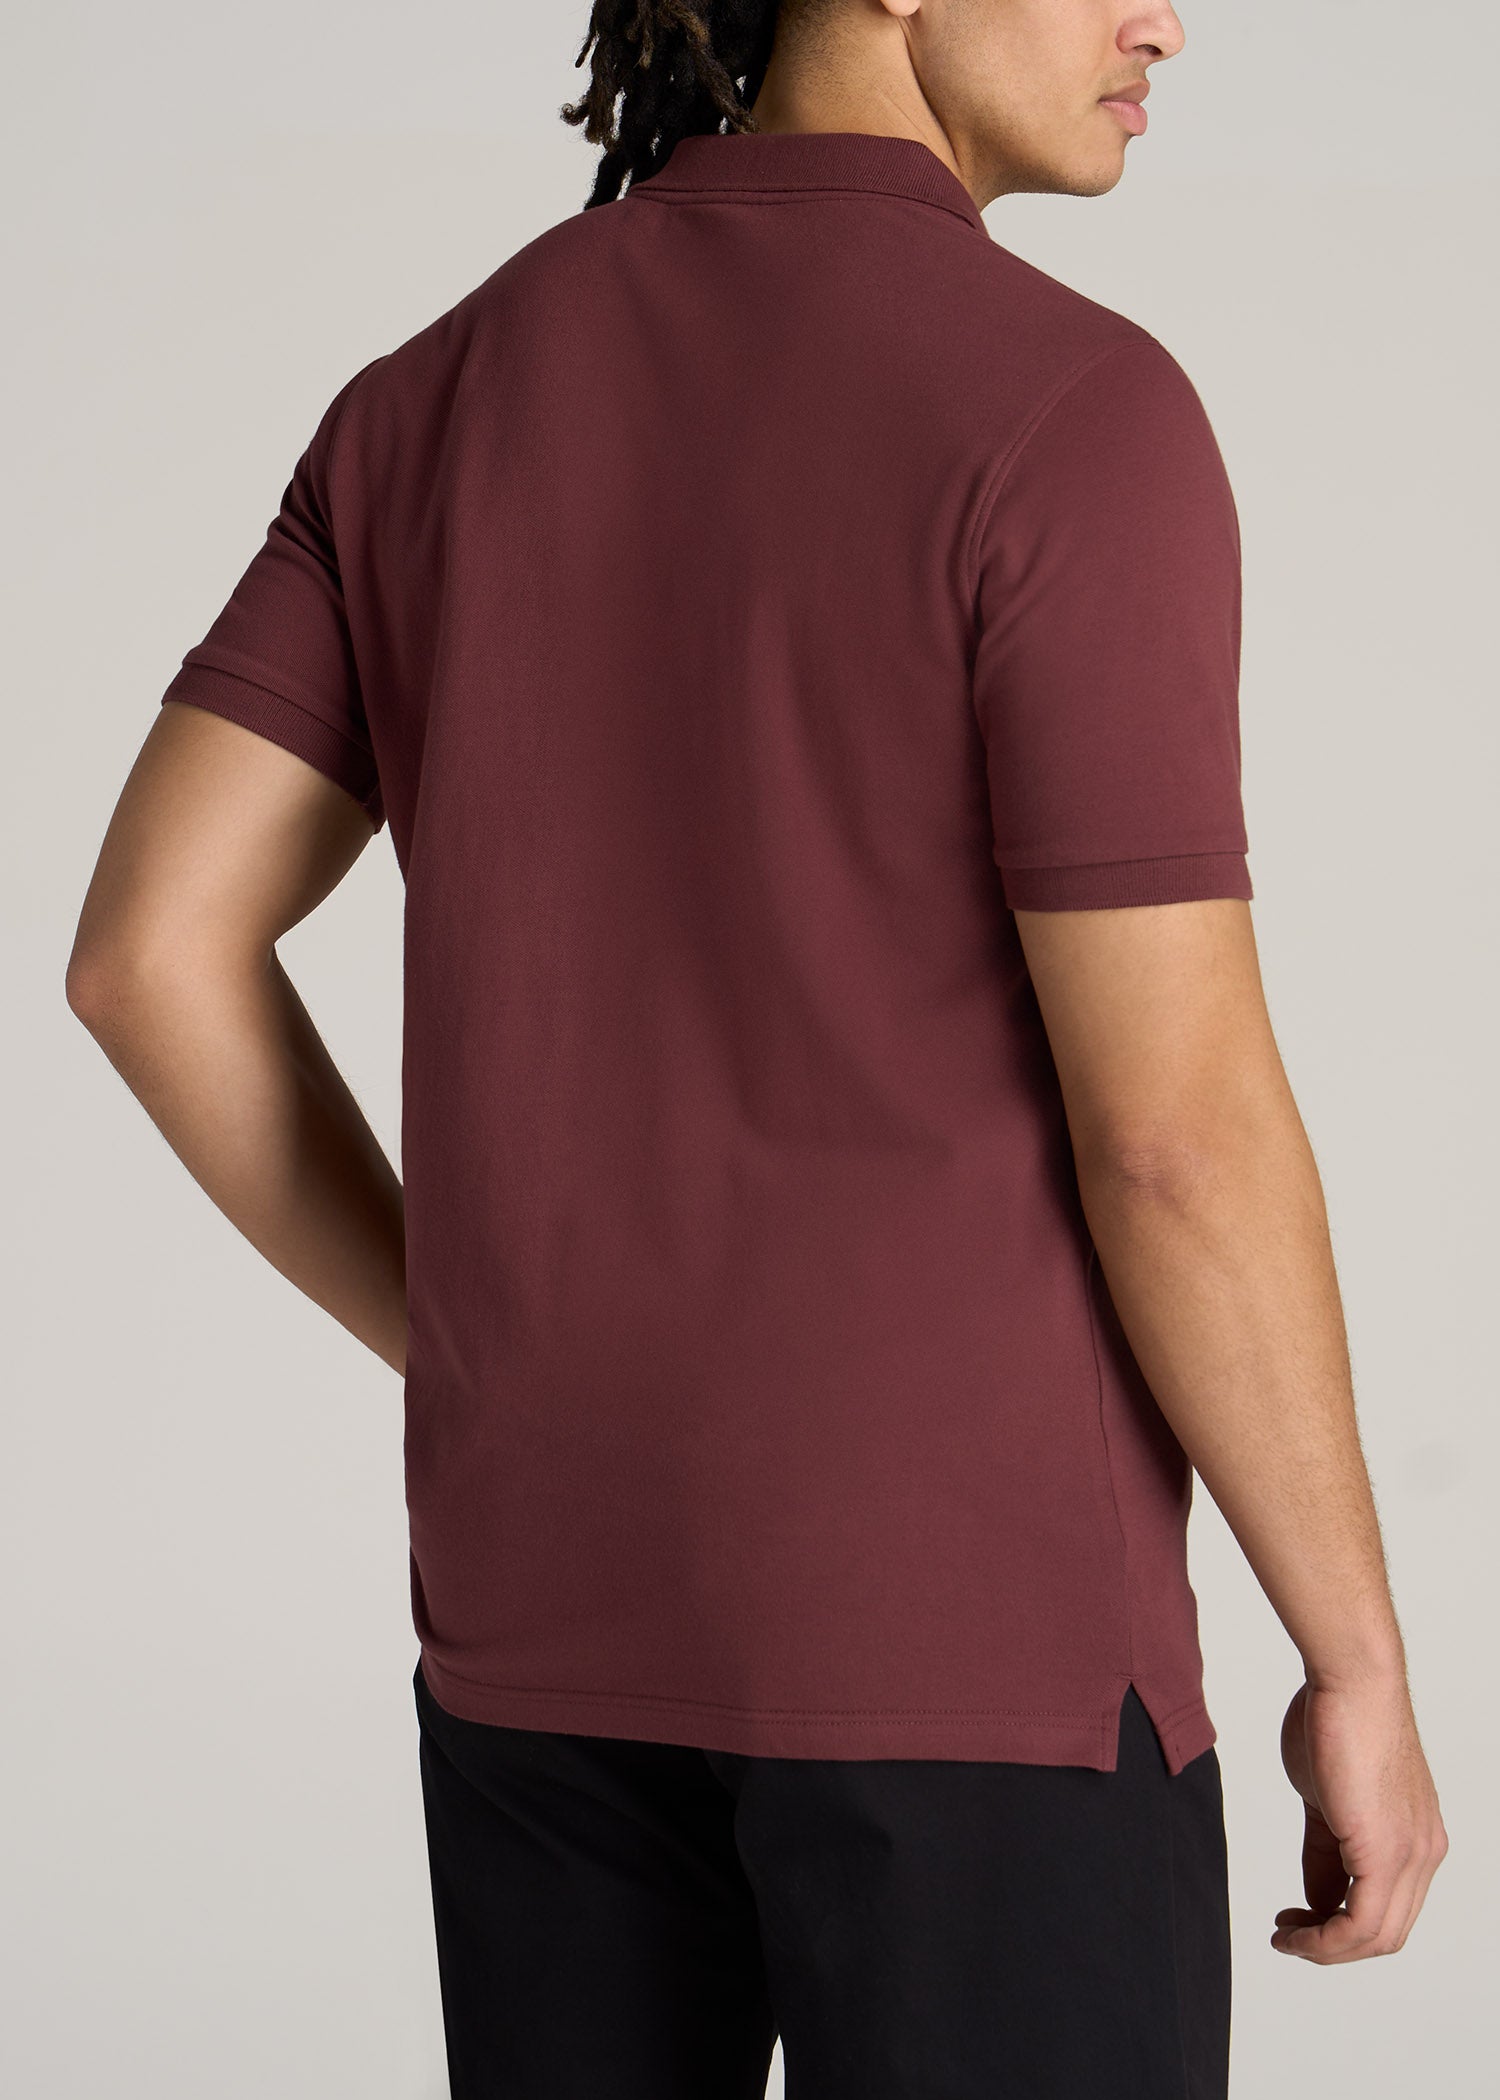 Polo Guinda Hombre for Tall Men: Cherry Brown Polo Shirt Embroidered –  American Tall